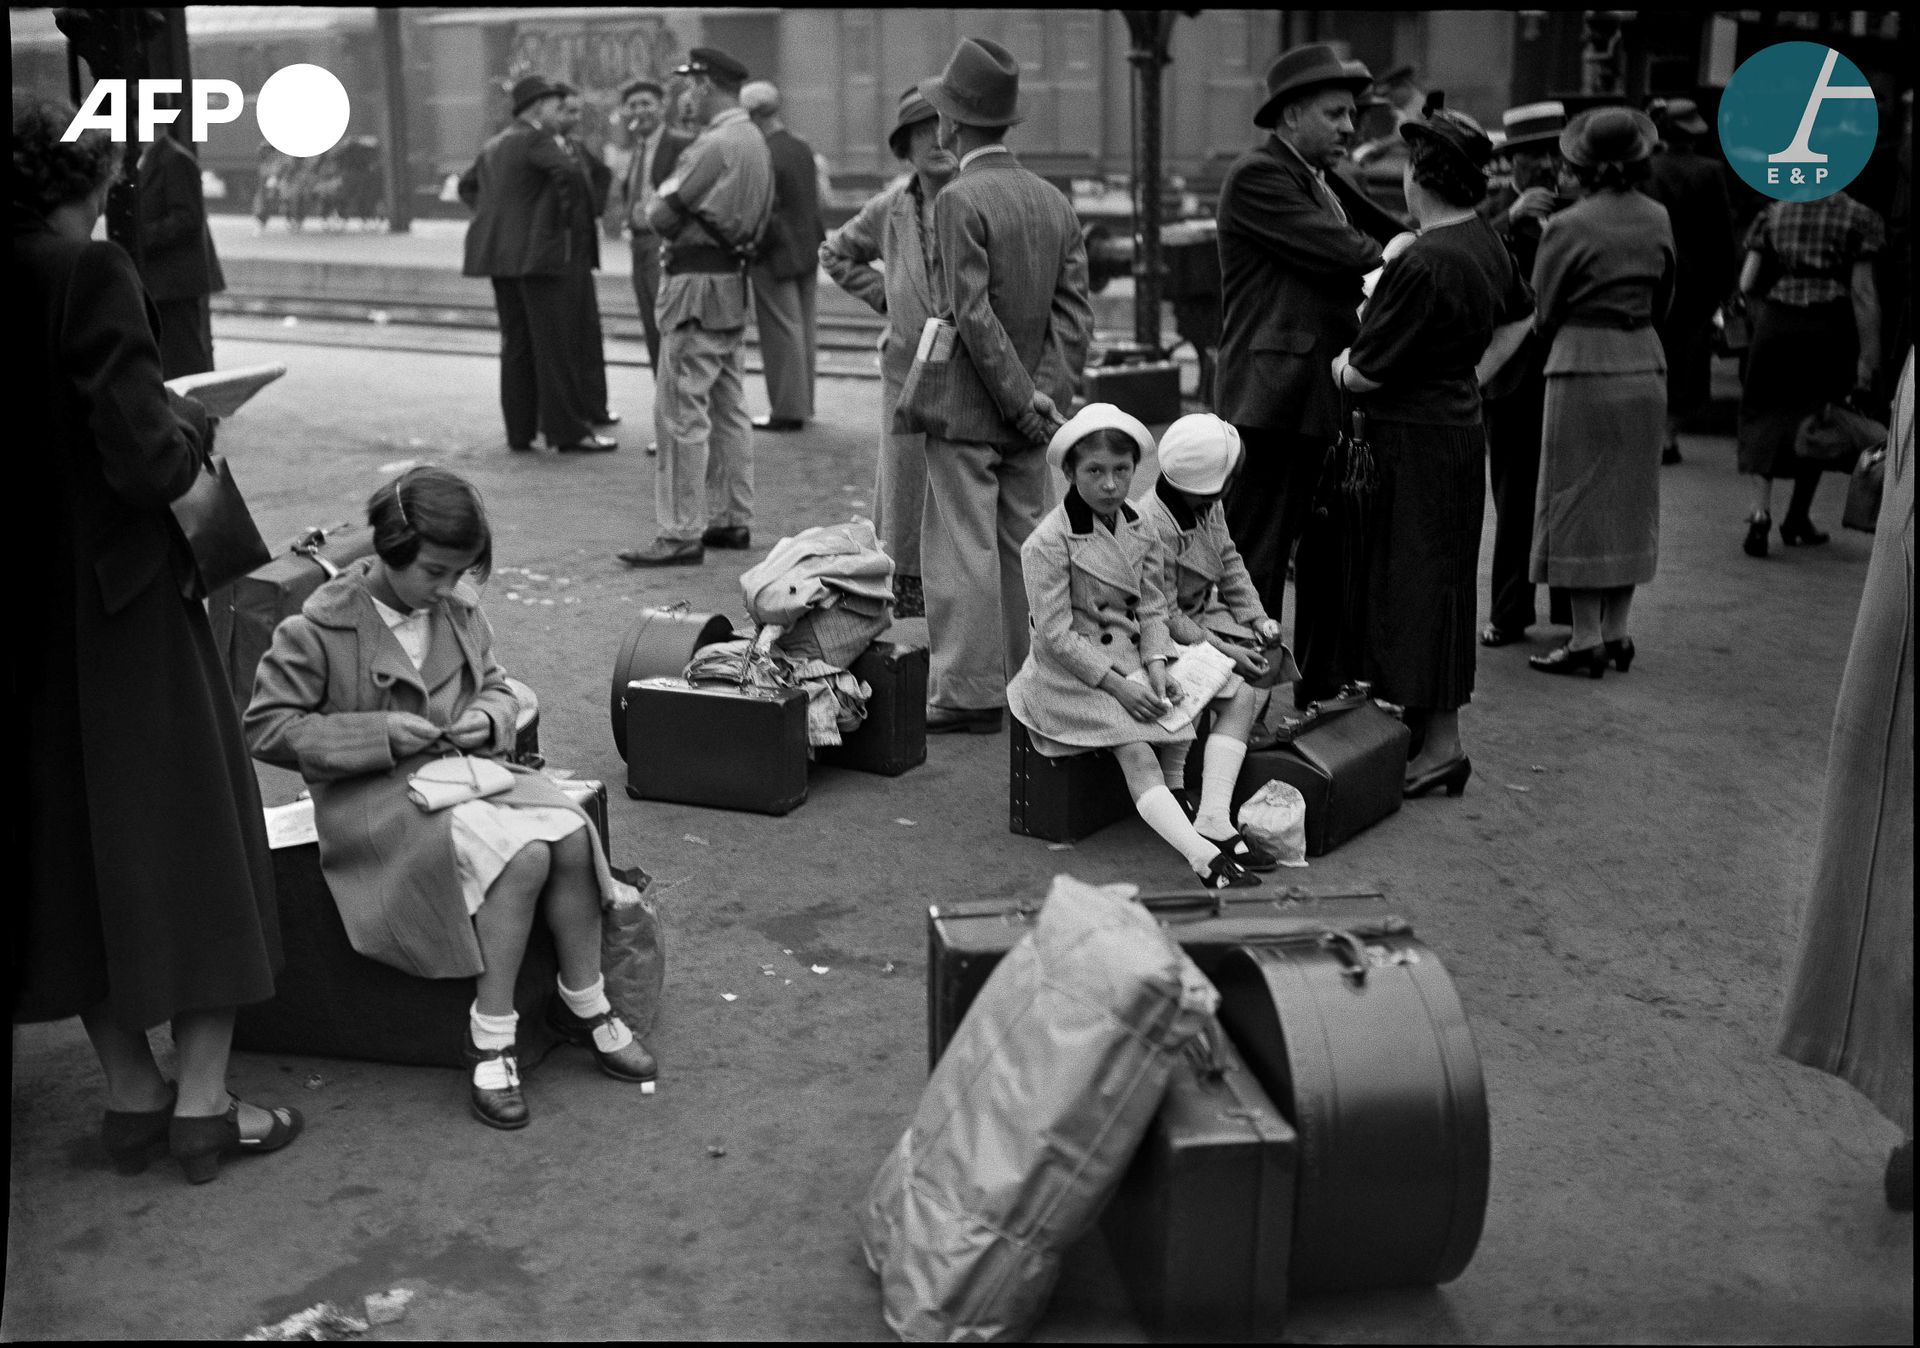 Null AFP

Departure for vacation at a Paris train station, August 7, 1938.

Holi&hellip;